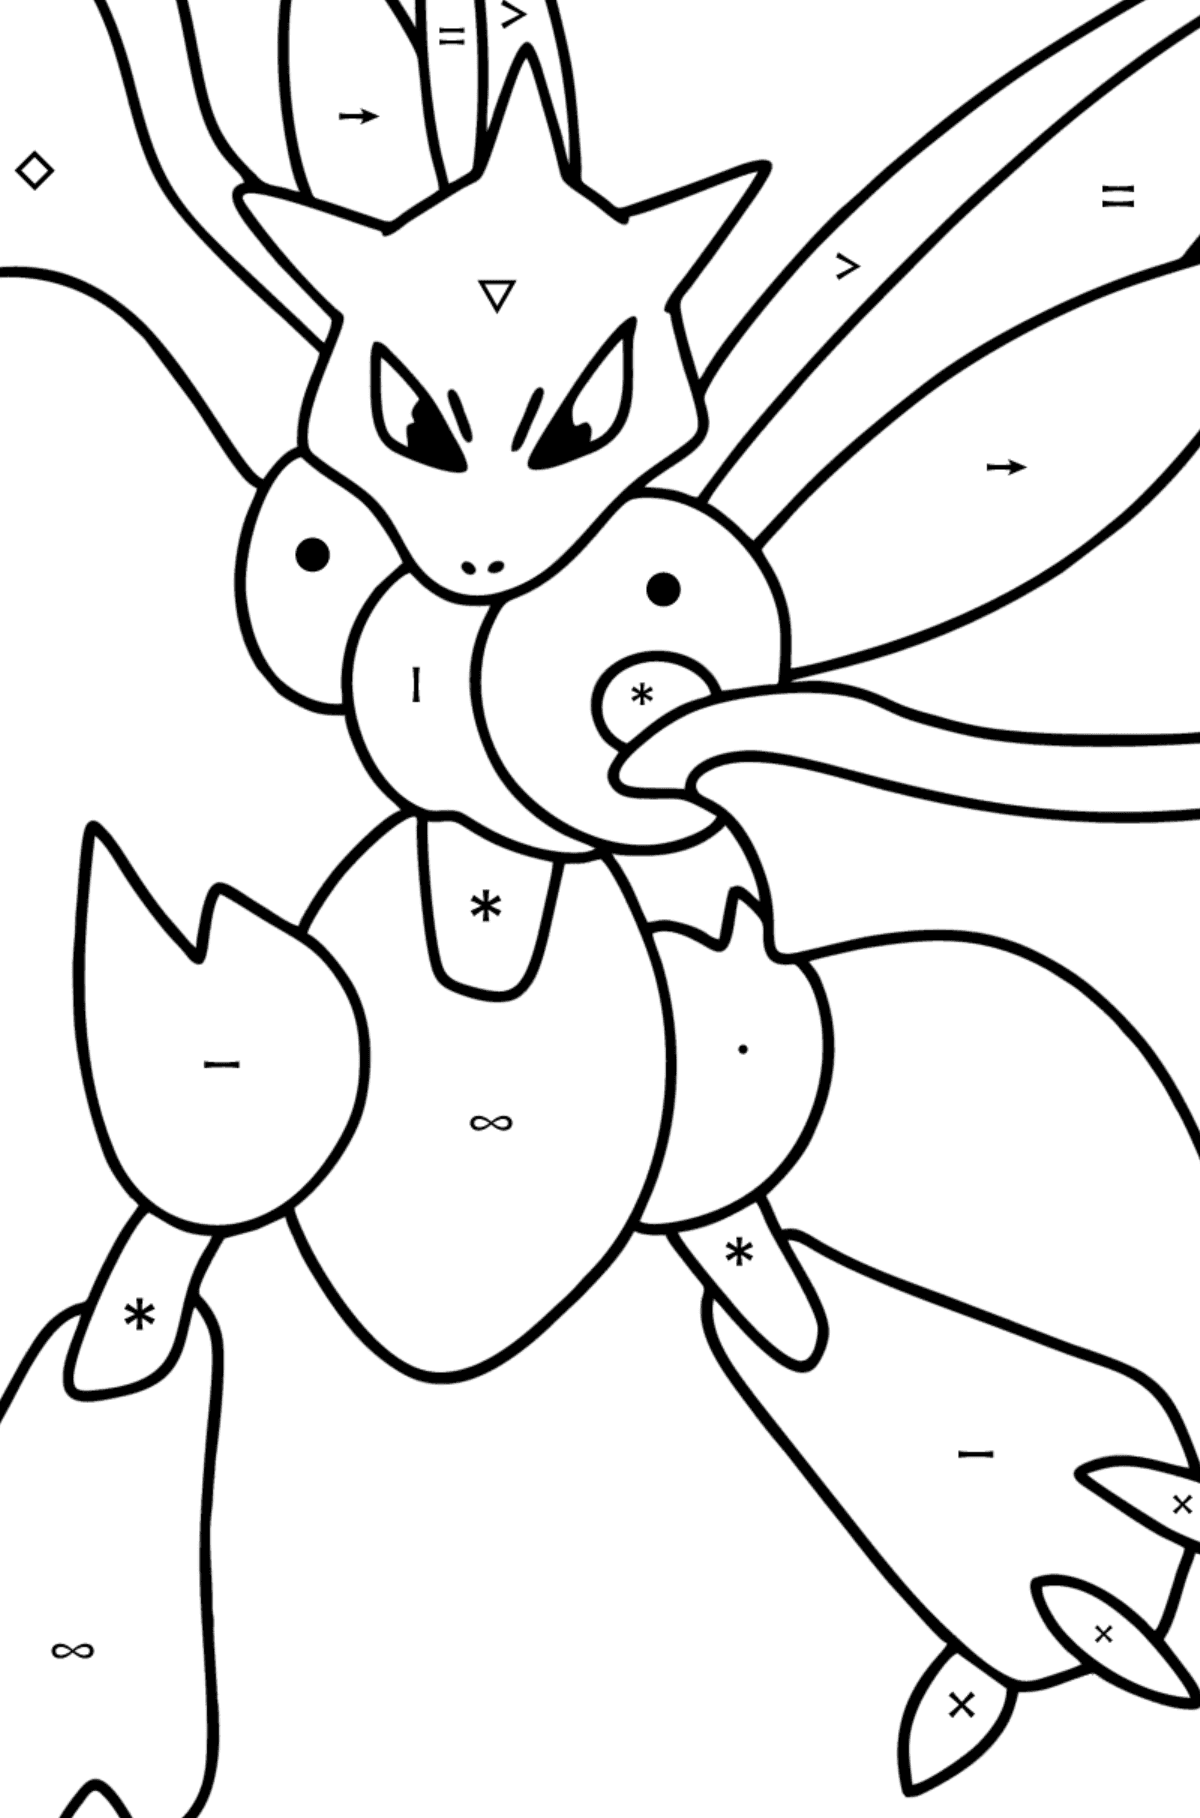 Coloring page Pokemon Go Scyther - Coloring by Symbols for Kids